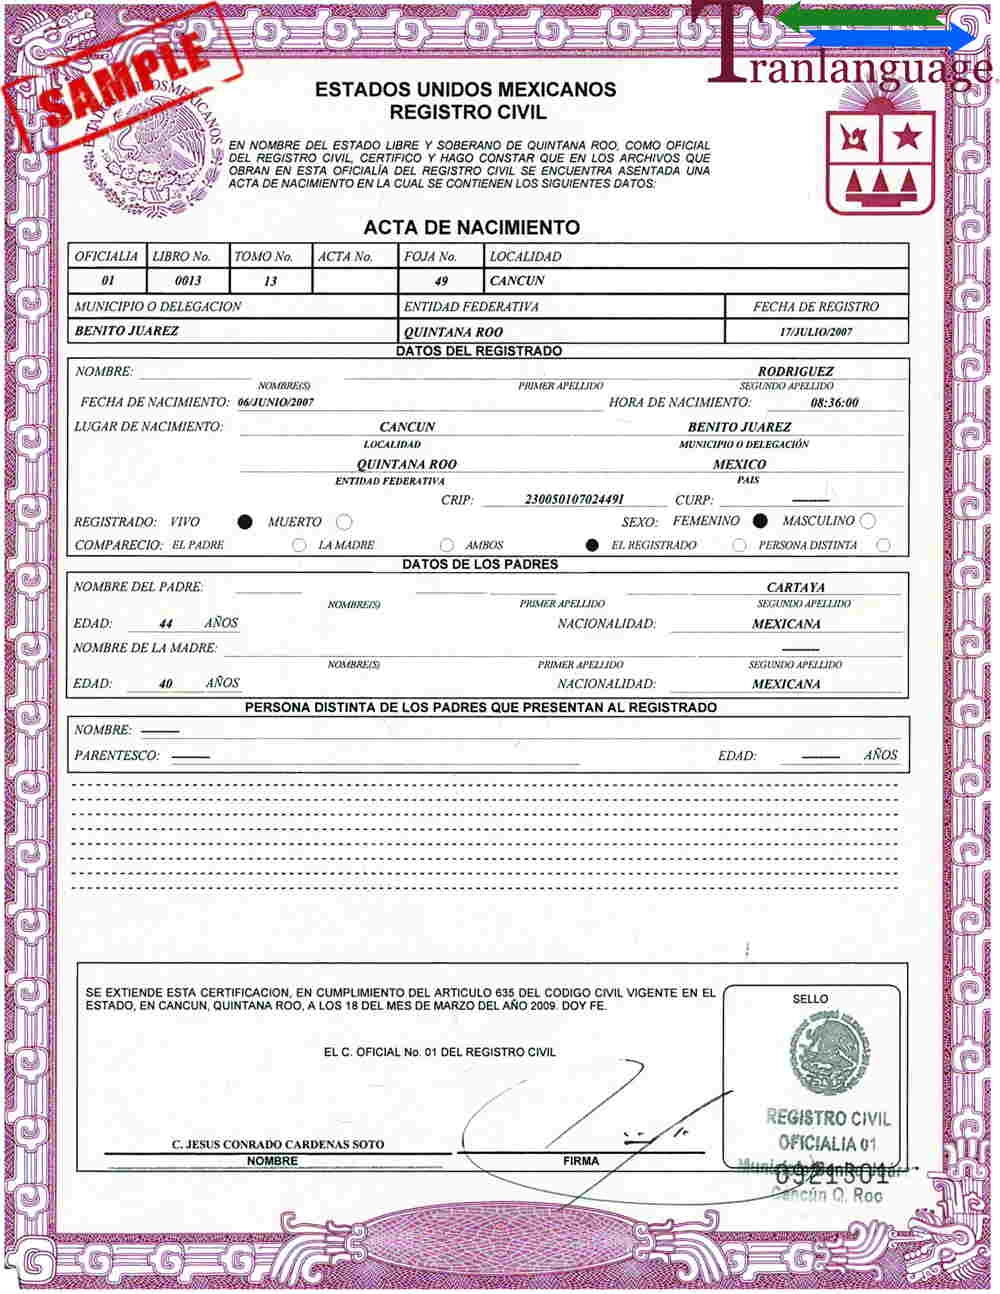 Bridging Cultures - A Comprehensive Mexican Birth Certificate Translation Template